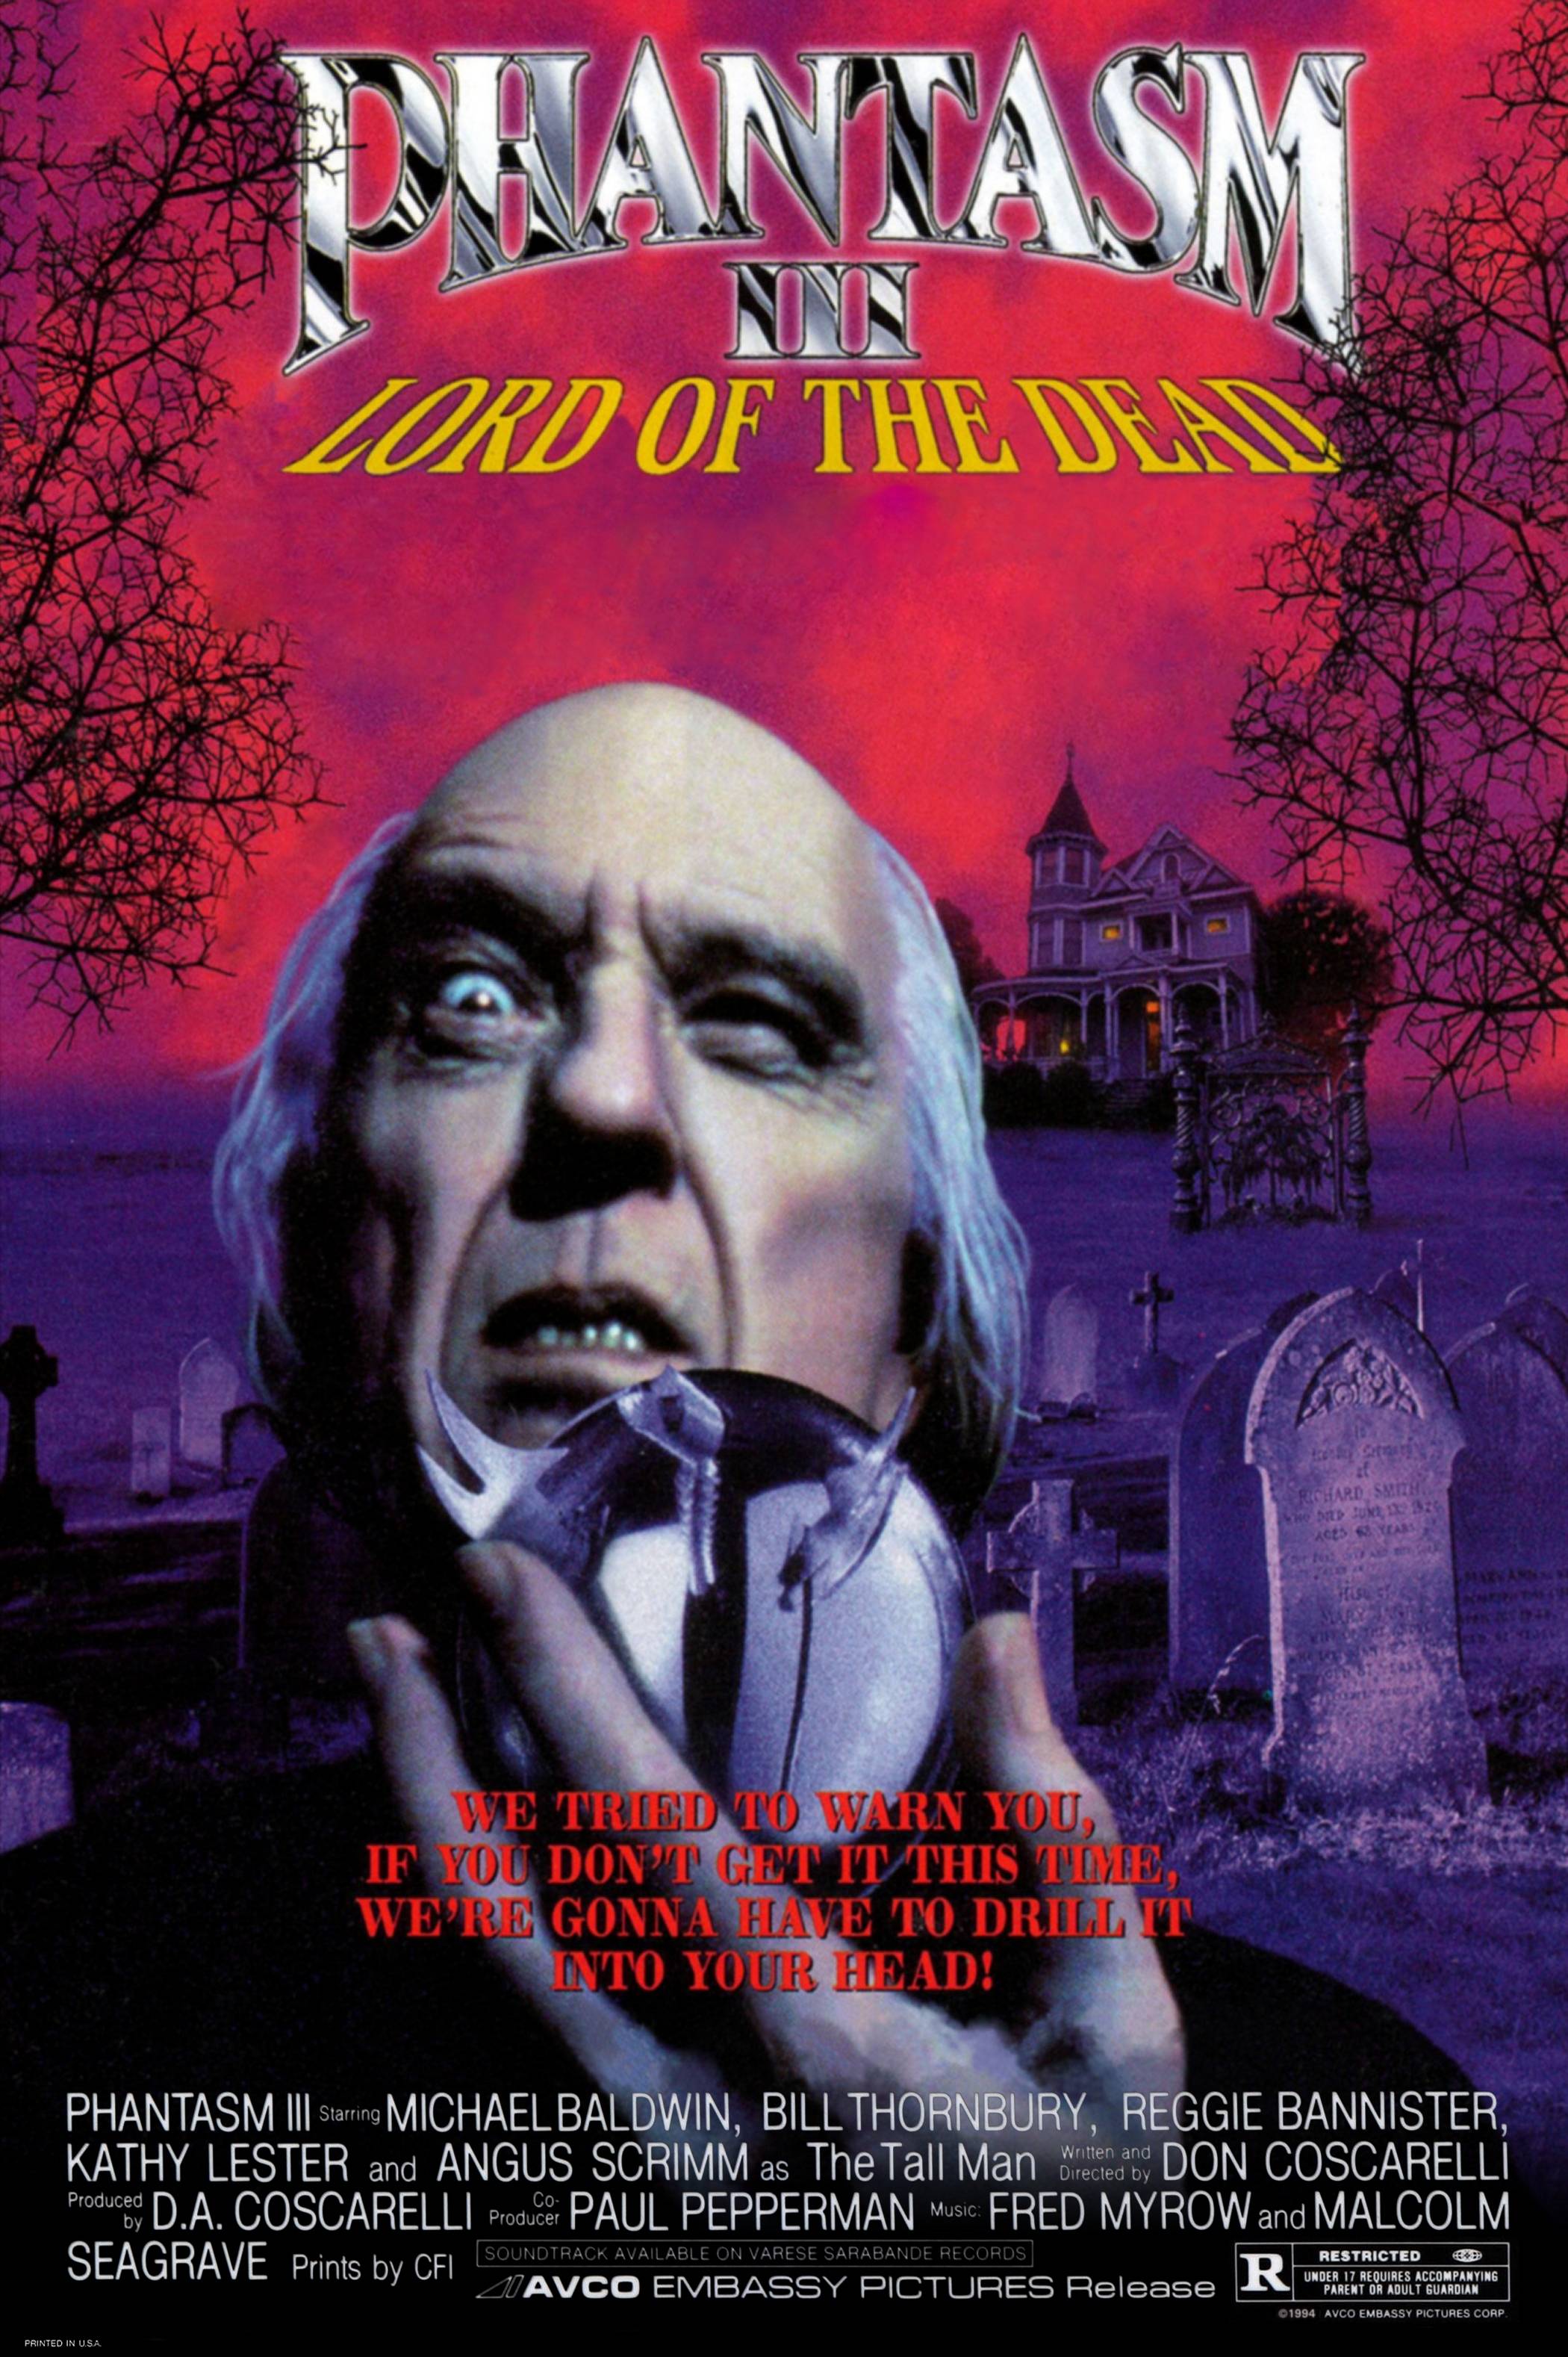 Poster for Phantasm III: Lord of the Dead